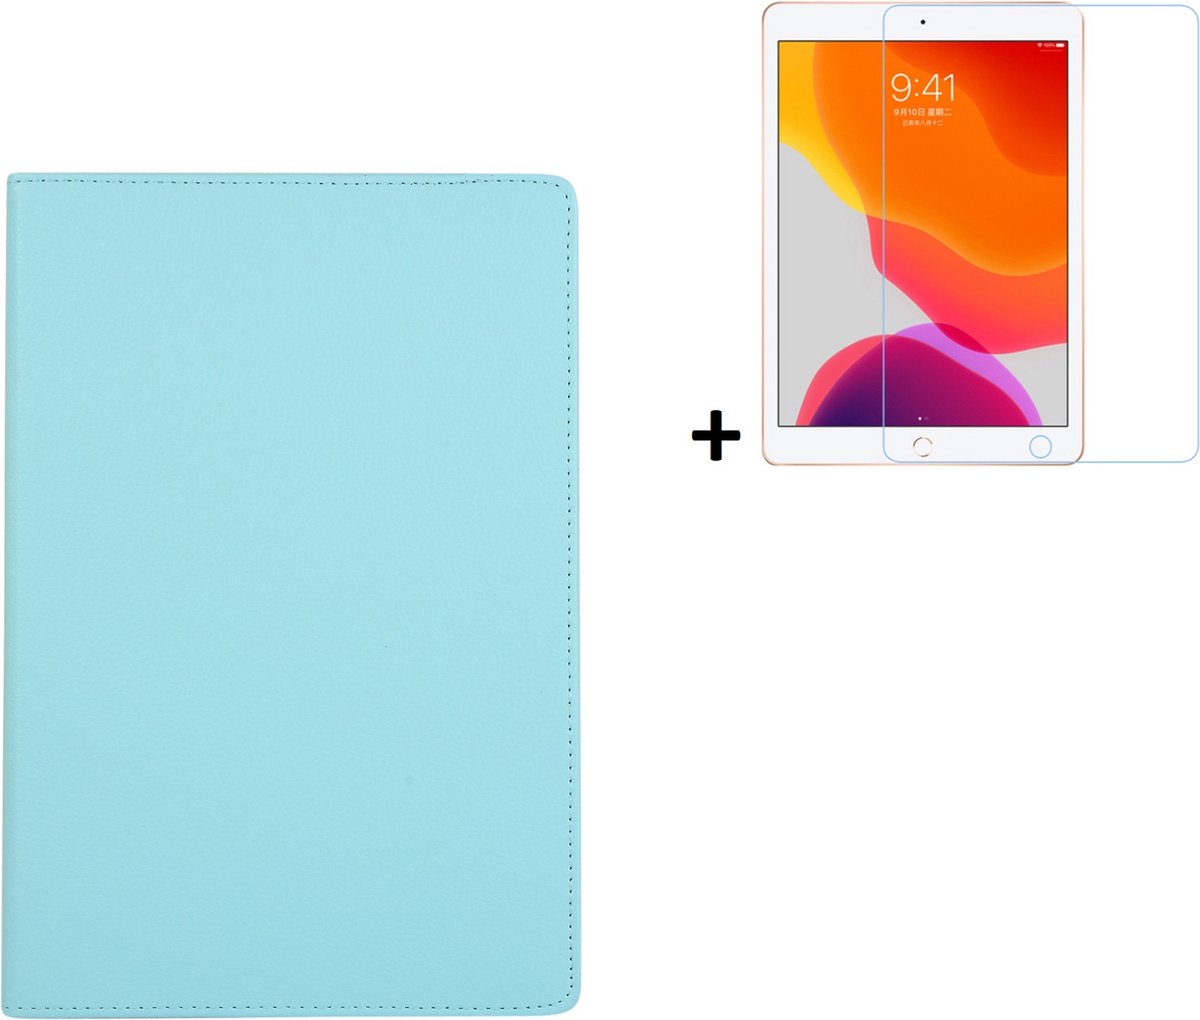 Hoesje iPad 7 10.2 2019 - 10.2 inch - Hoesje iPad 8 10.2 2020 - Hoesje iPad 9 10.2 2021 - iPad 10.2 Bookcase Hoes - Screen Protector iPad 10.2 - Turquoise Hoesje + Tempered Glass